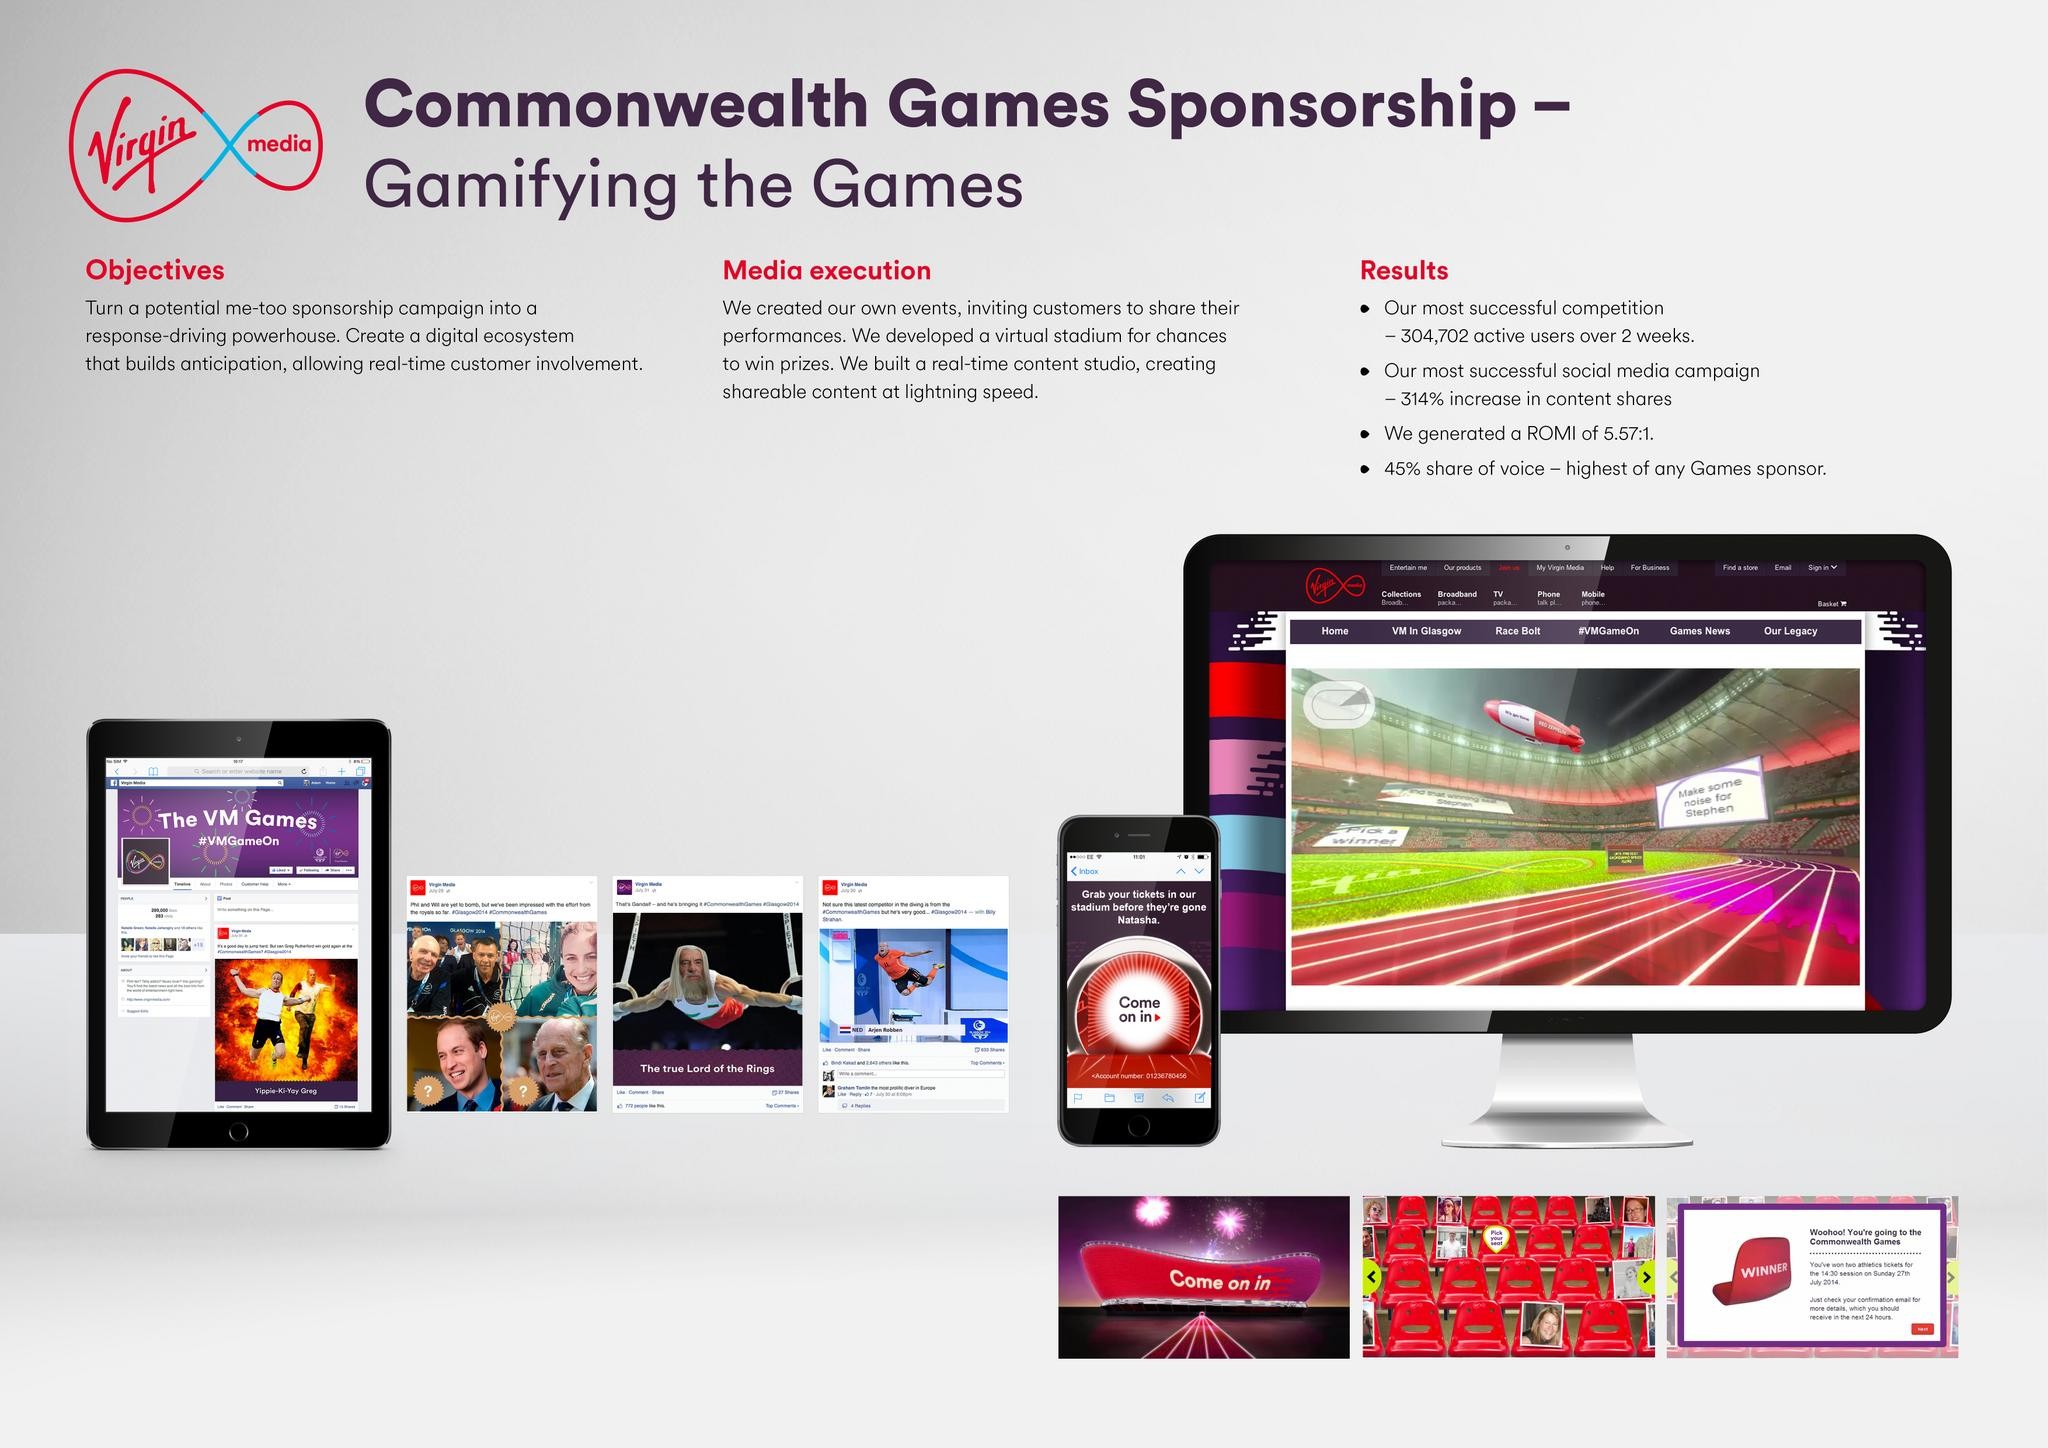 COMMONWEALTH GAMES SPONSORSHIP ACTIVATION